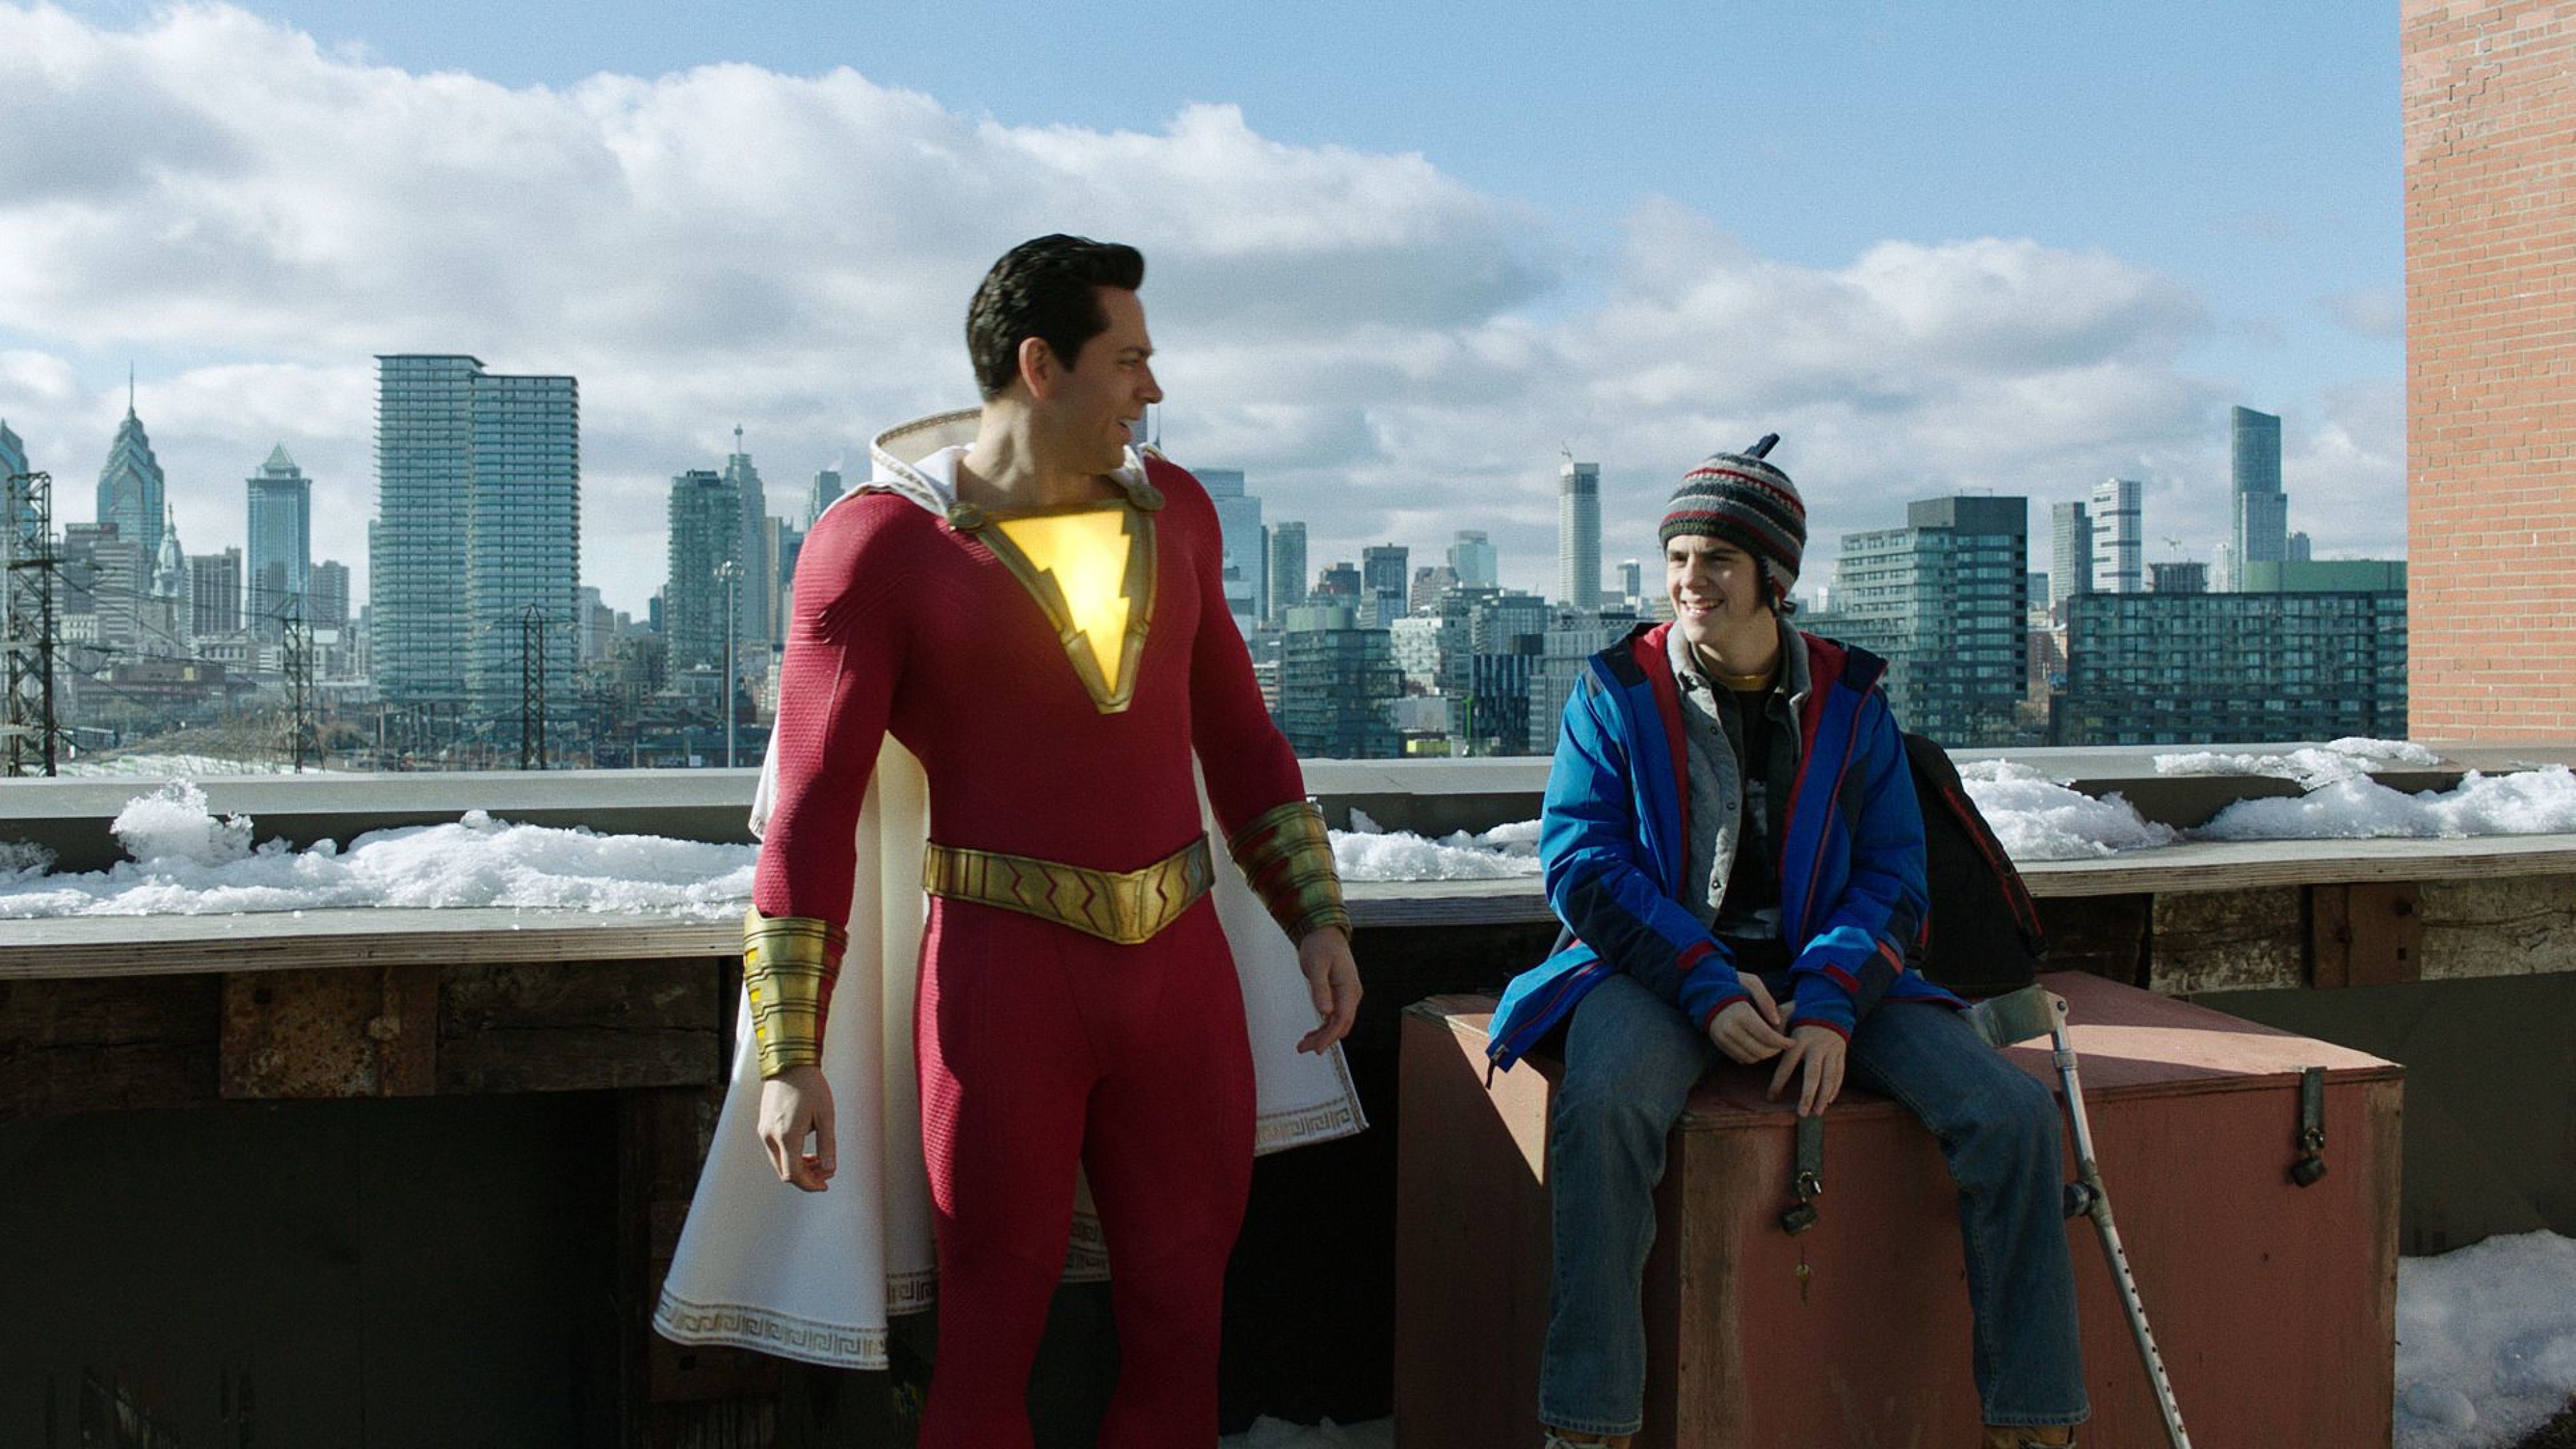 Box Office Results: Shazam! Fury of the Gods Tumbles in Opening